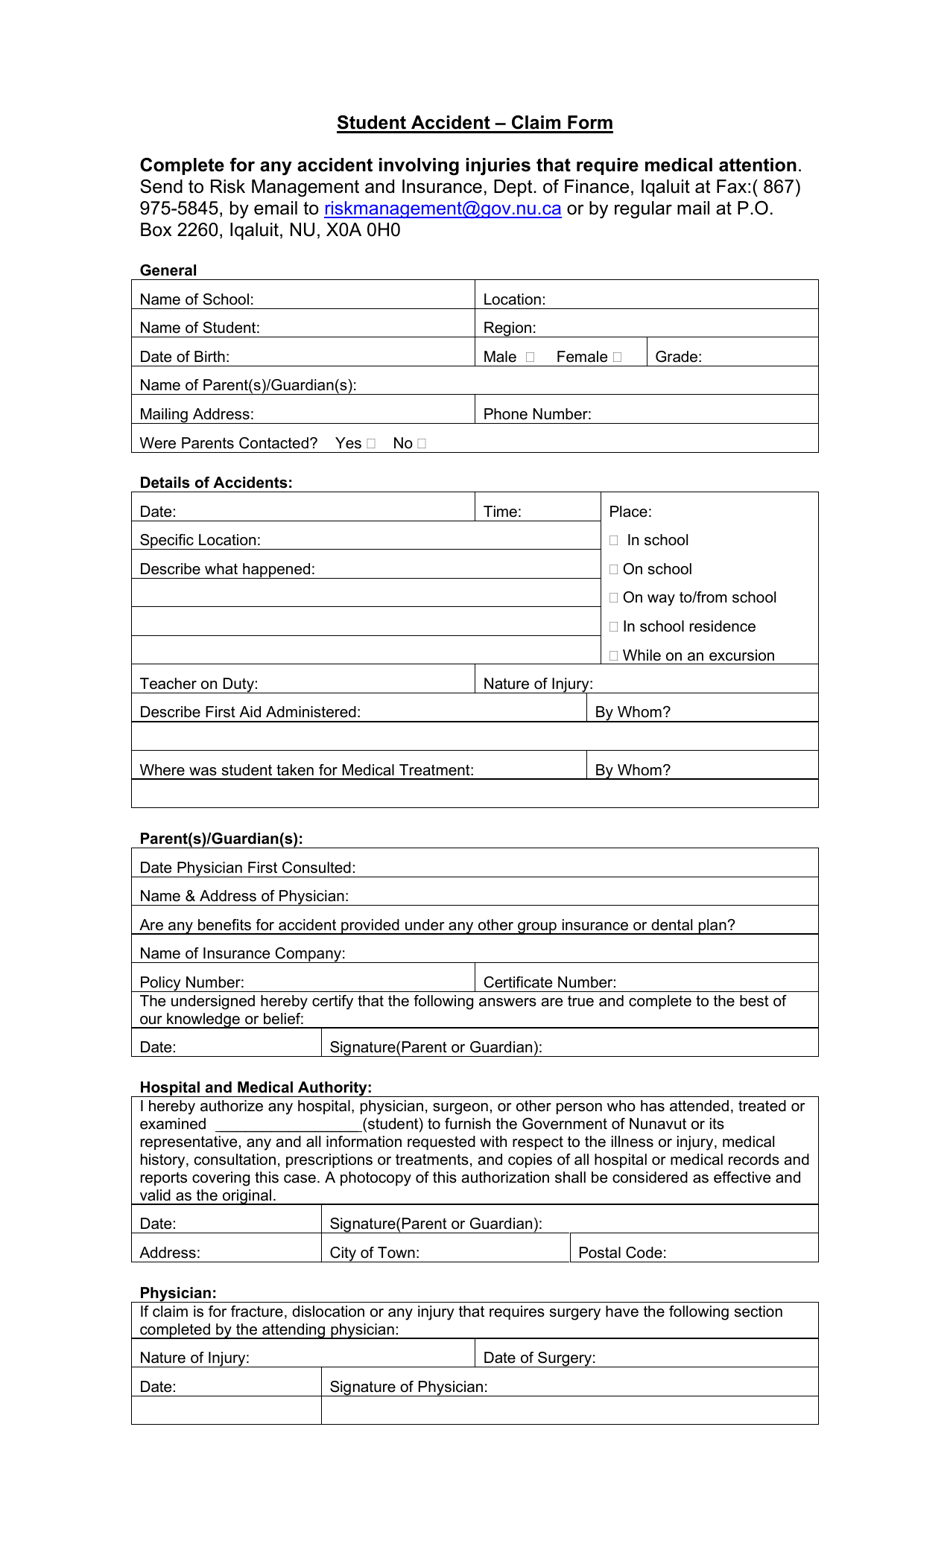 Student Accident - Claim Form - Nunavut, Canada, Page 1